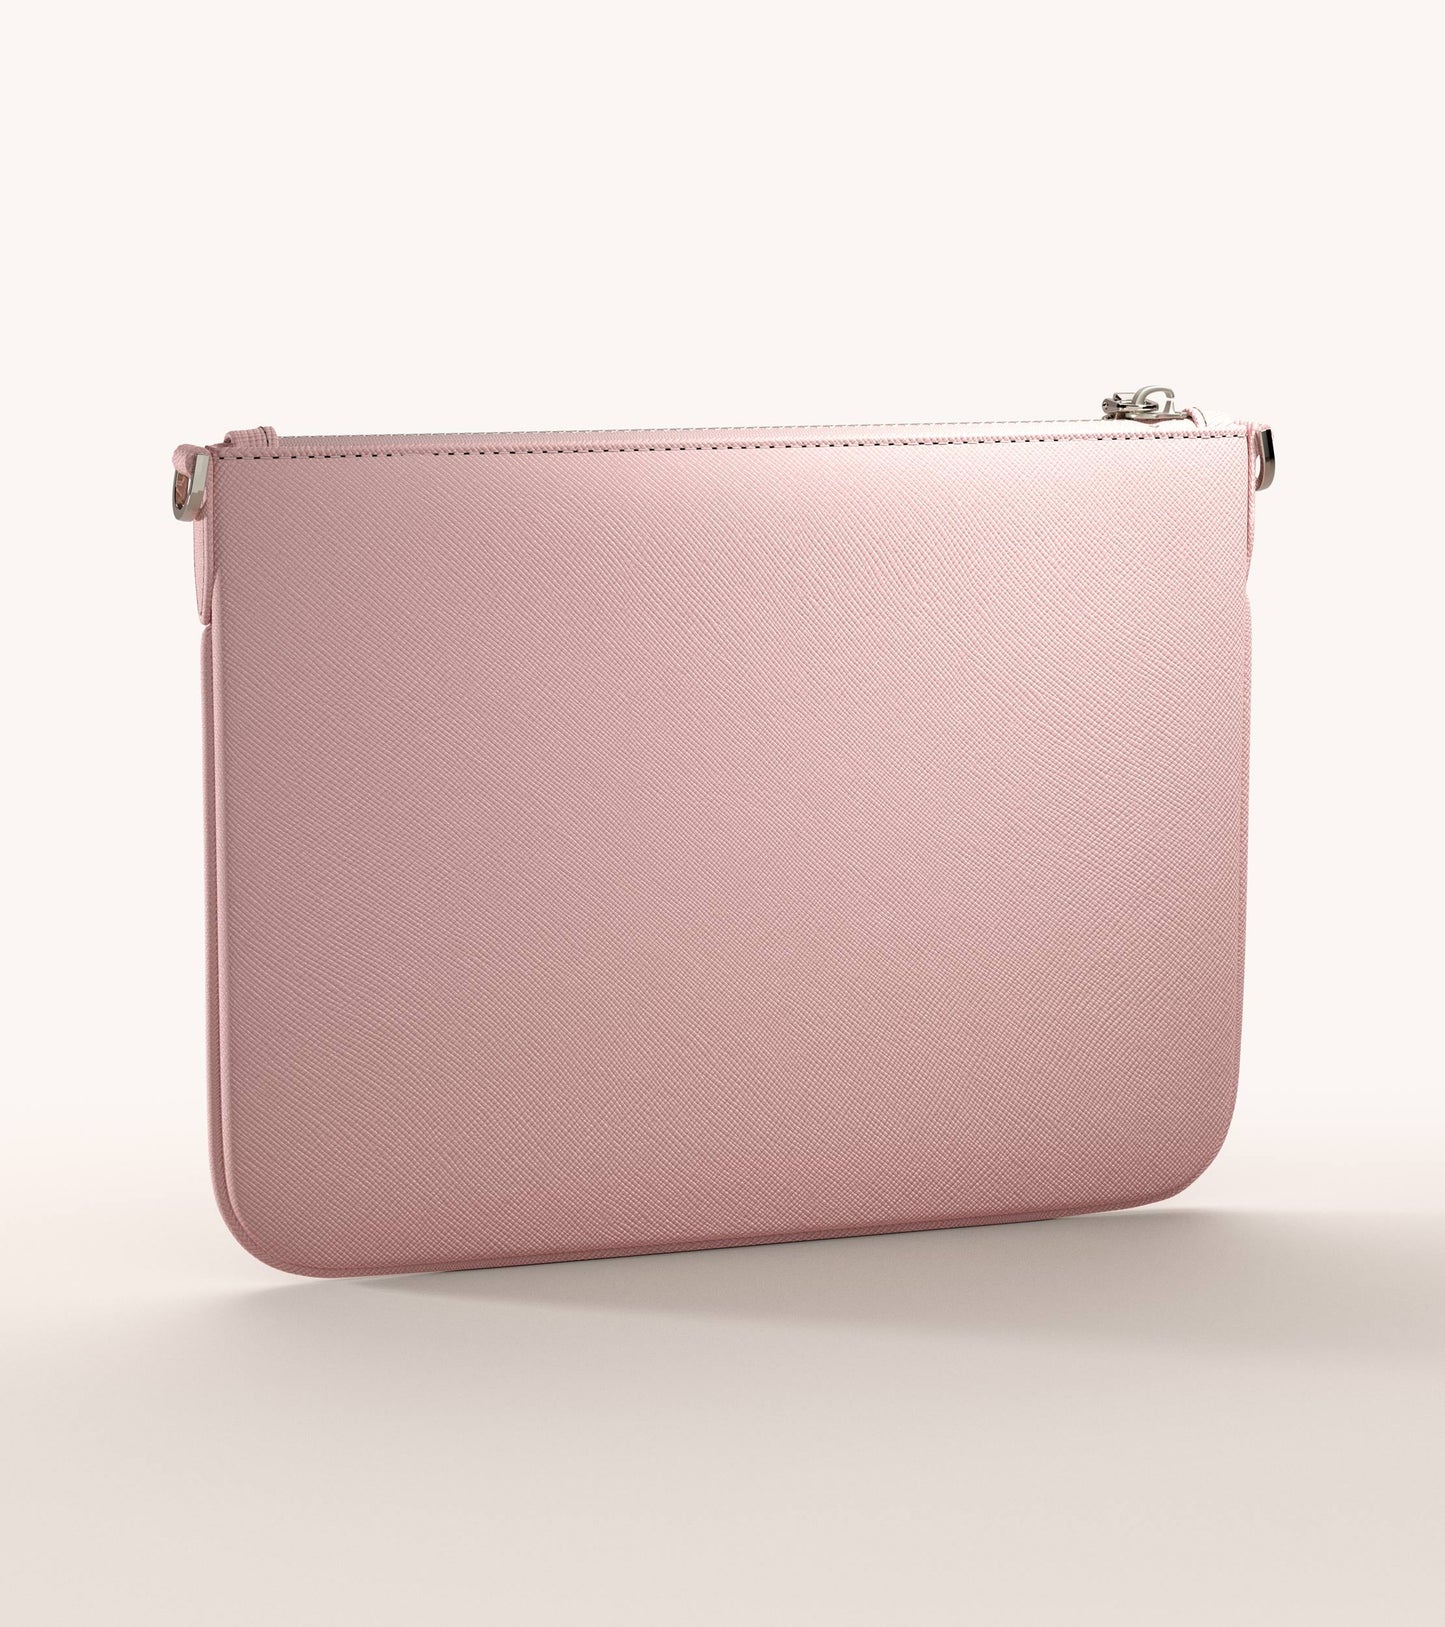 Burberry Tb Pouch Grainy Leather Top Handle Bag In Dusky Pink | ModeSens